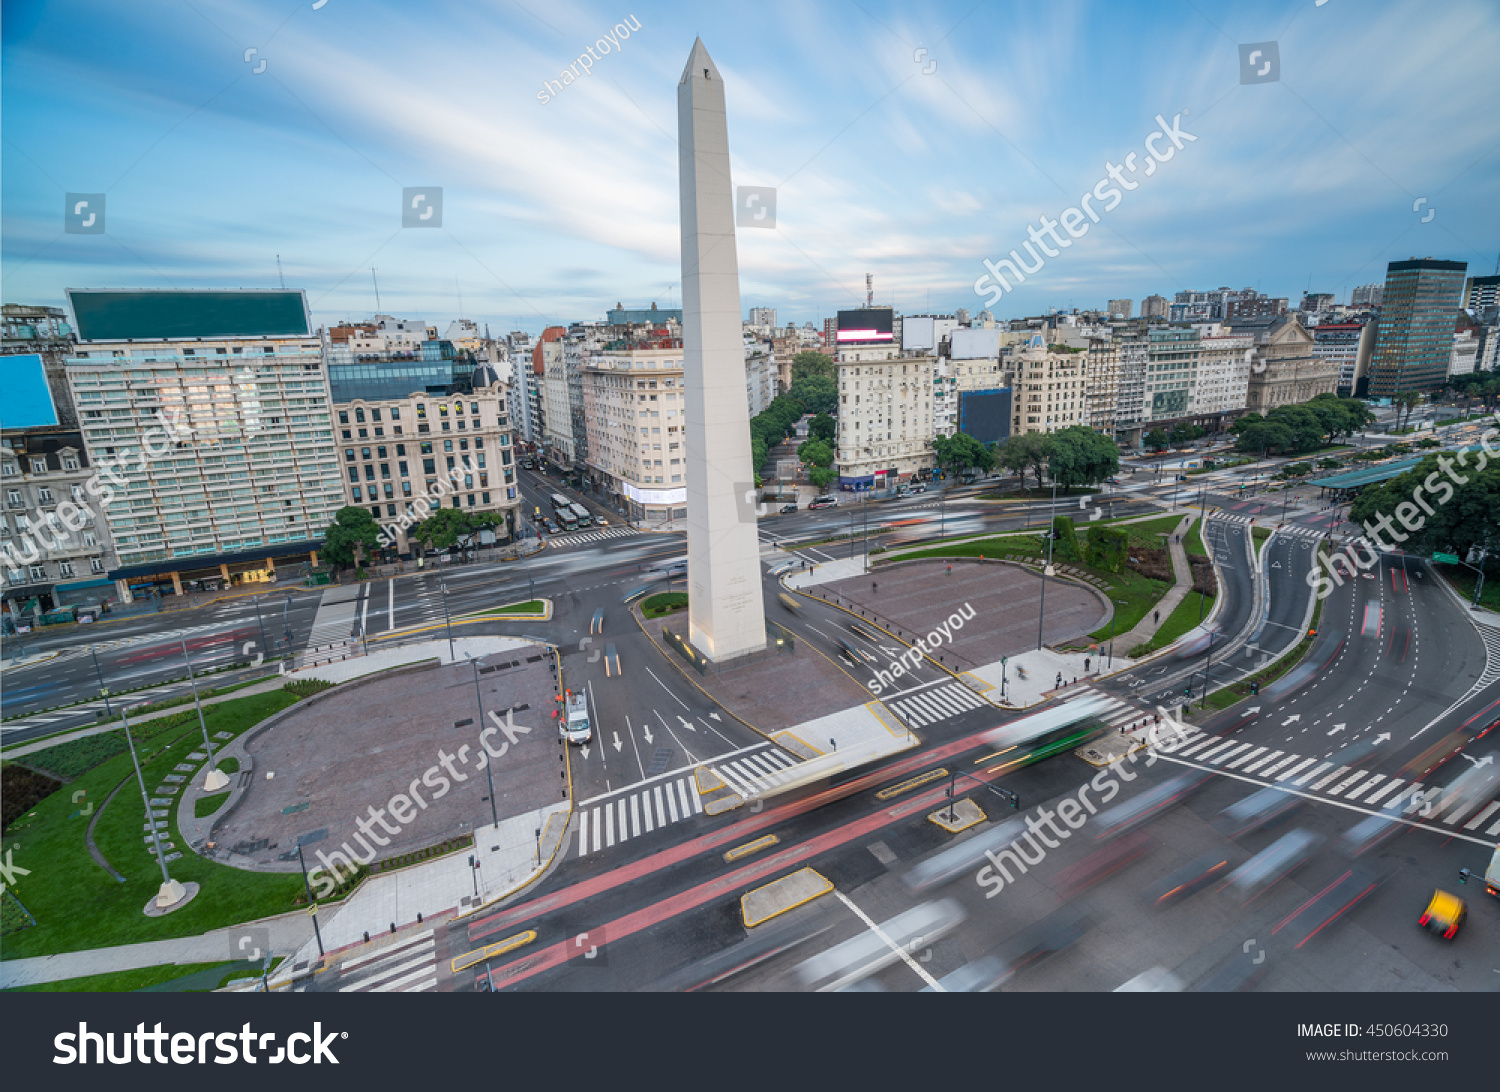 The Obelisk of Buenos Aires, centre of the city - Argentina #450604330